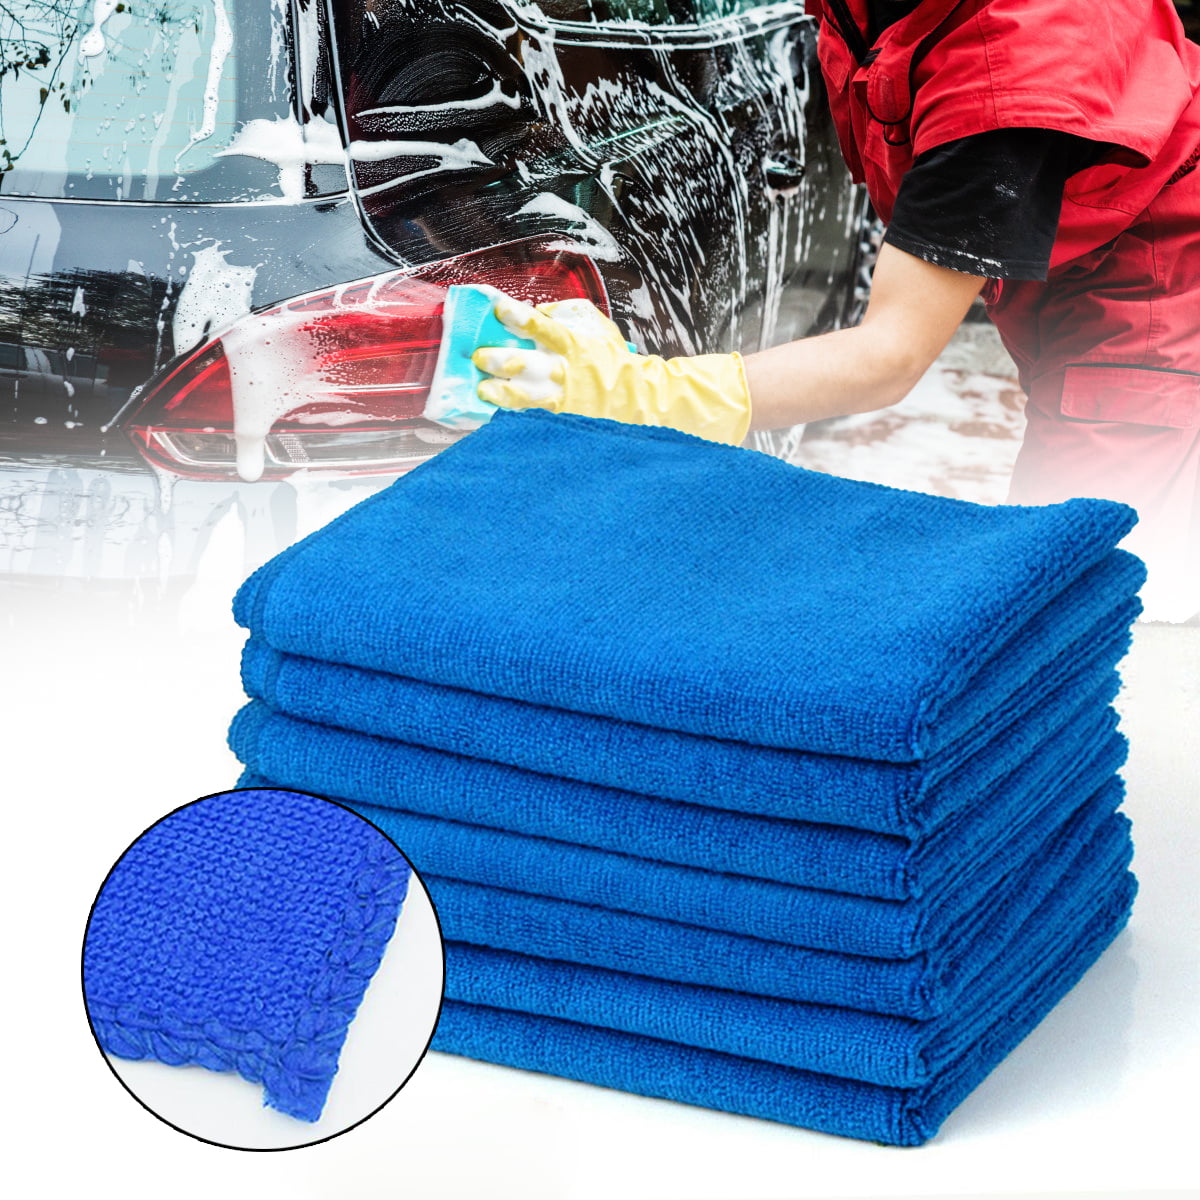 Microfiber Cleaning Cloth Towel Absorbent No Scratch Polishing Detailing Rags.